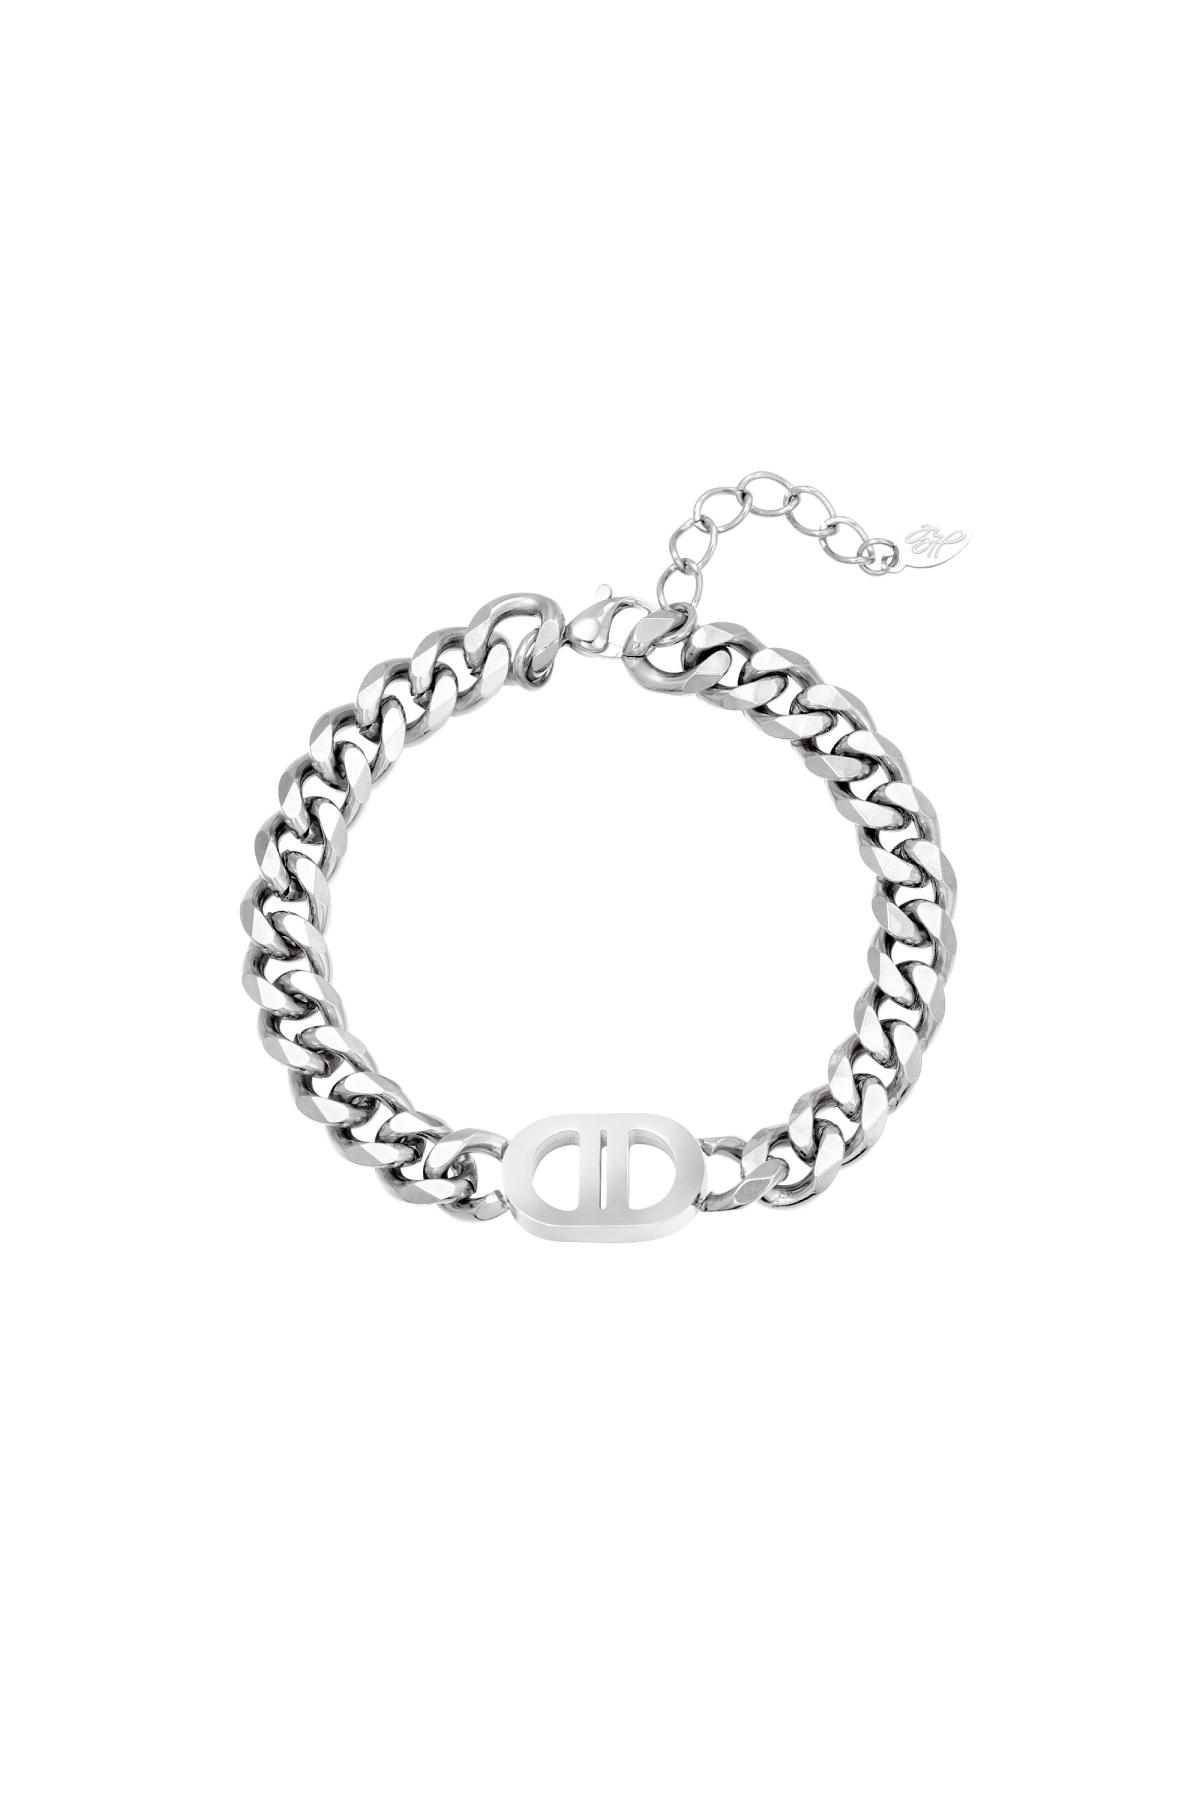 Bracelet The Good Life Silver Stainless Steel h5 